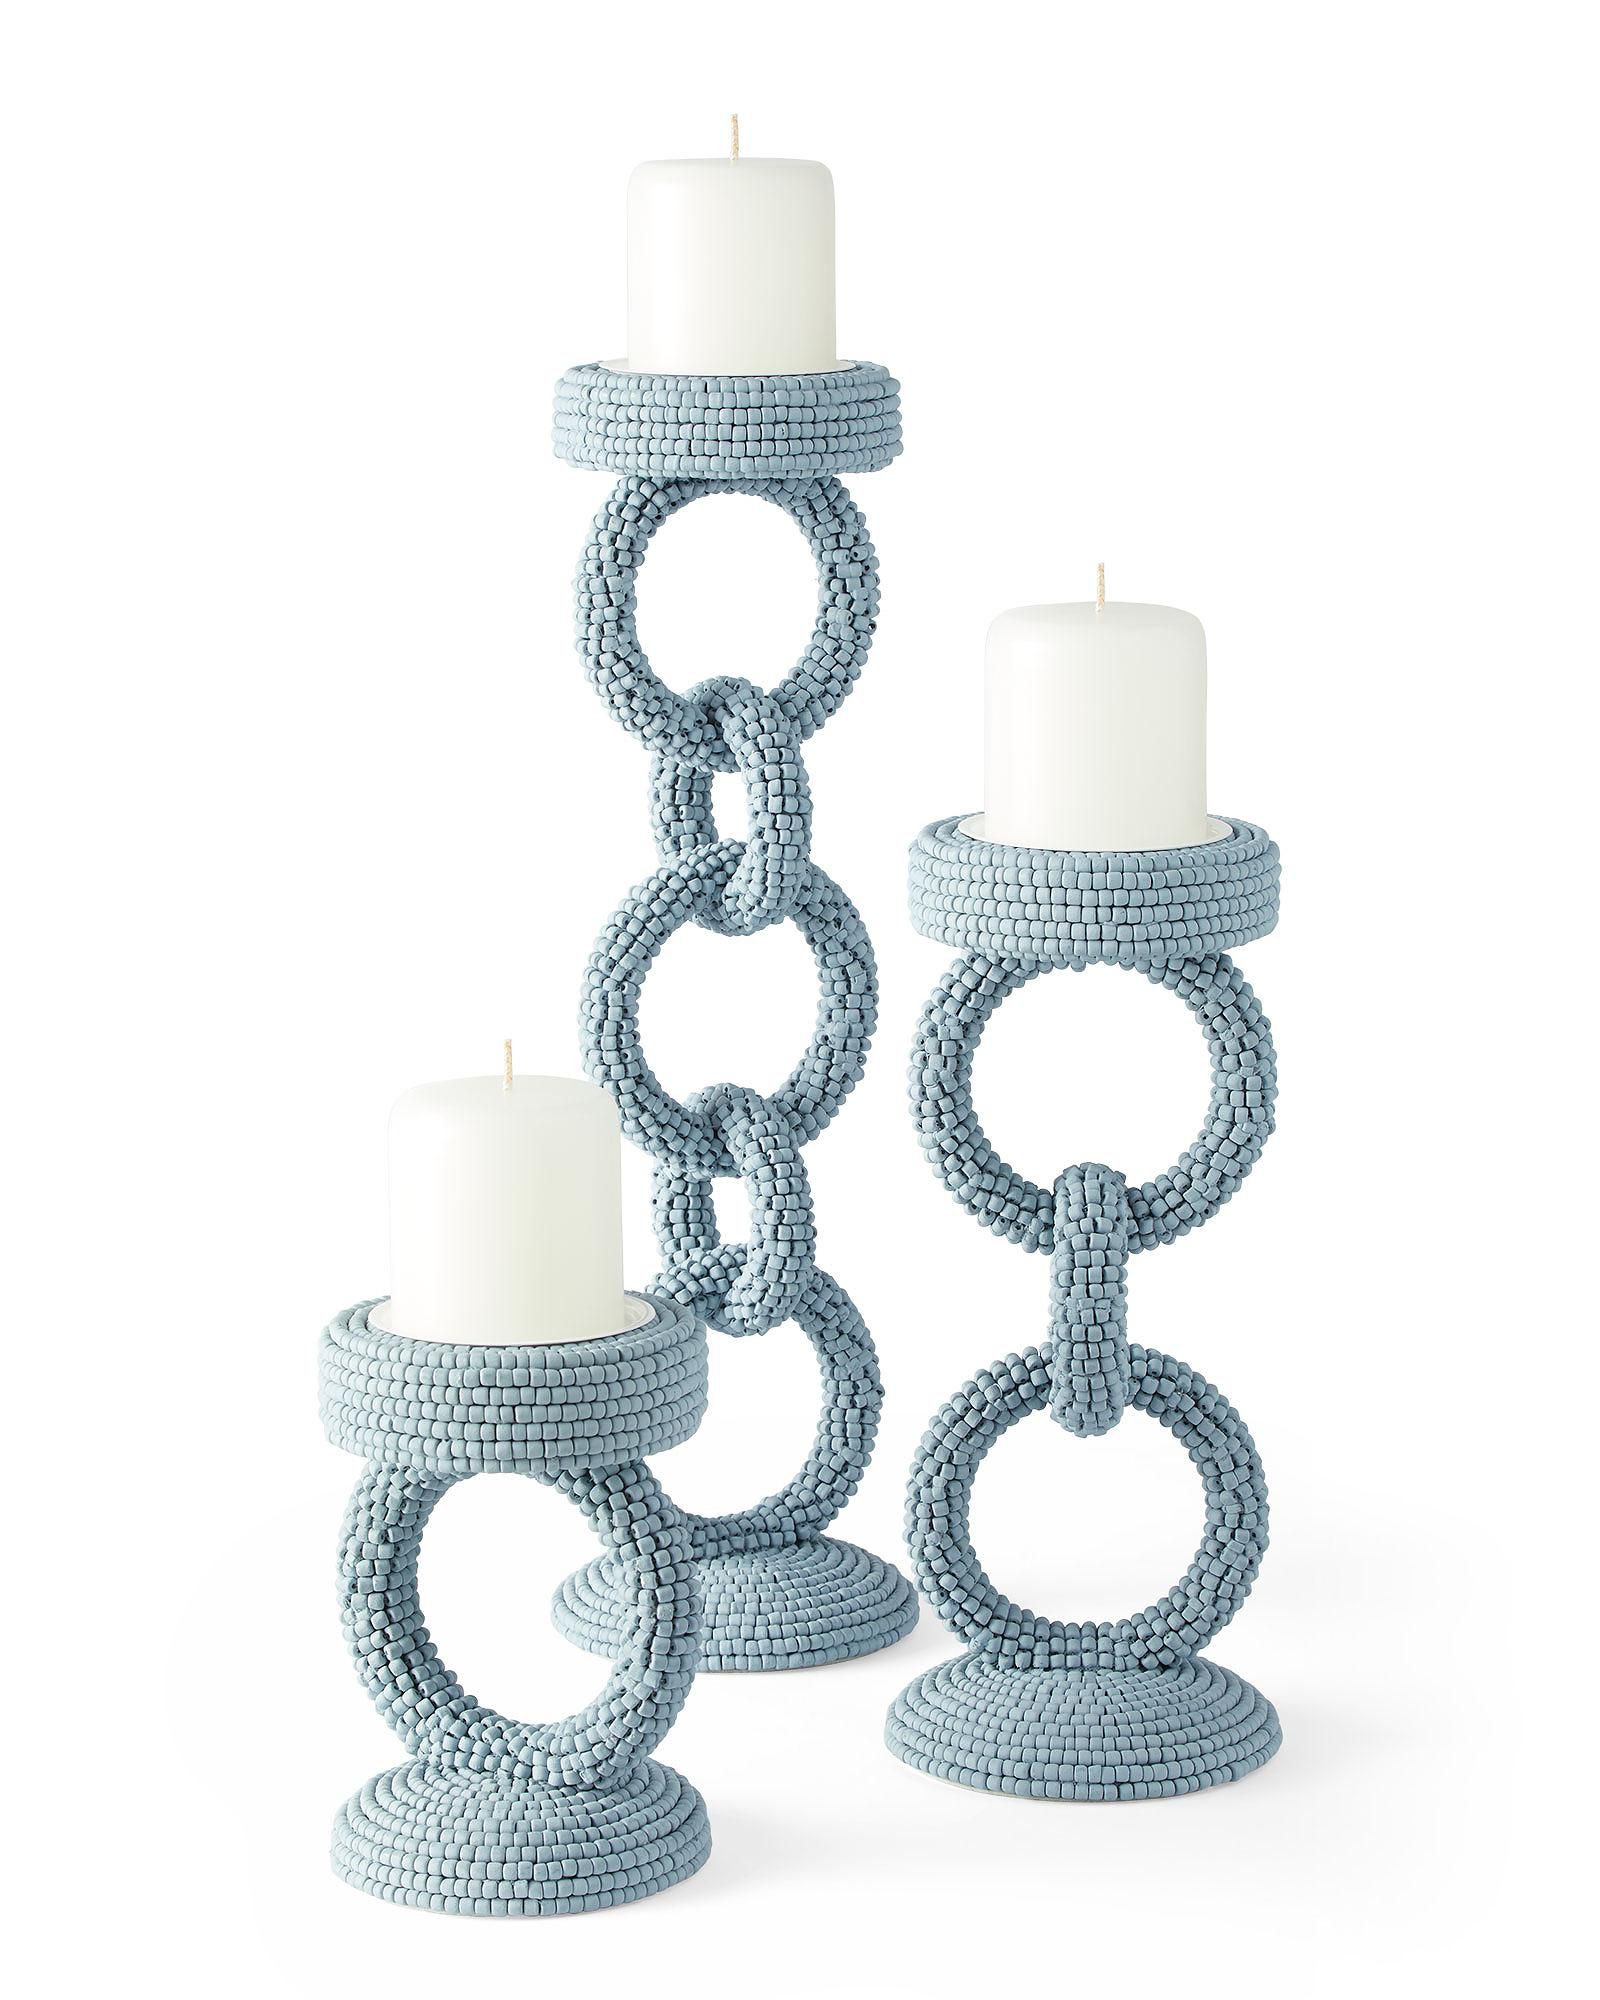 Del Sur Candleholder | Serena and Lily